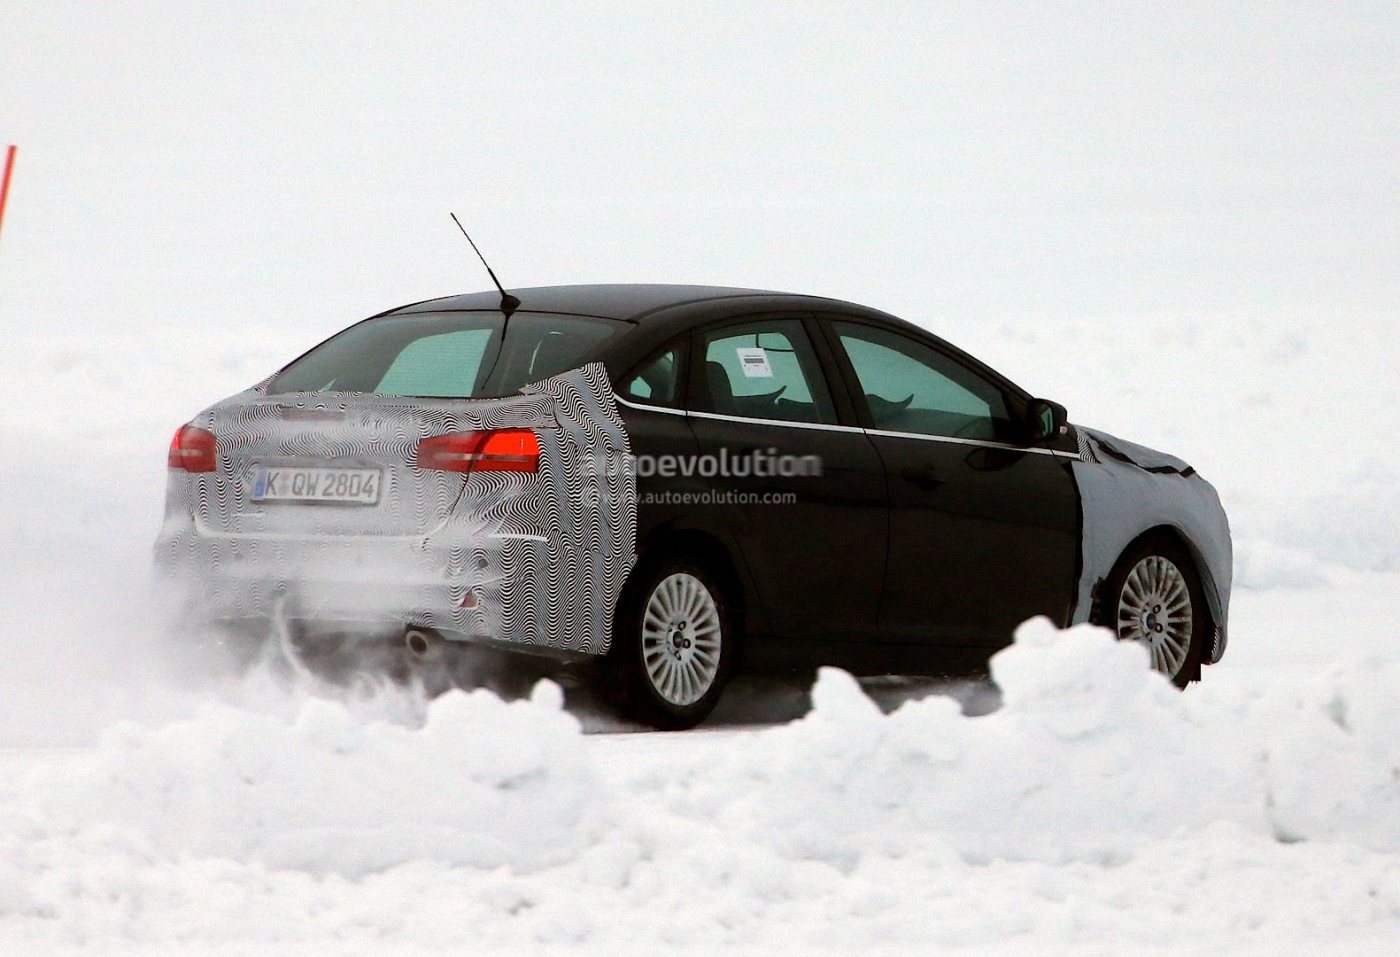 latest-ford-focus-facelift-spy-photos-show-part-of-new-chrome-grille_11.jpg